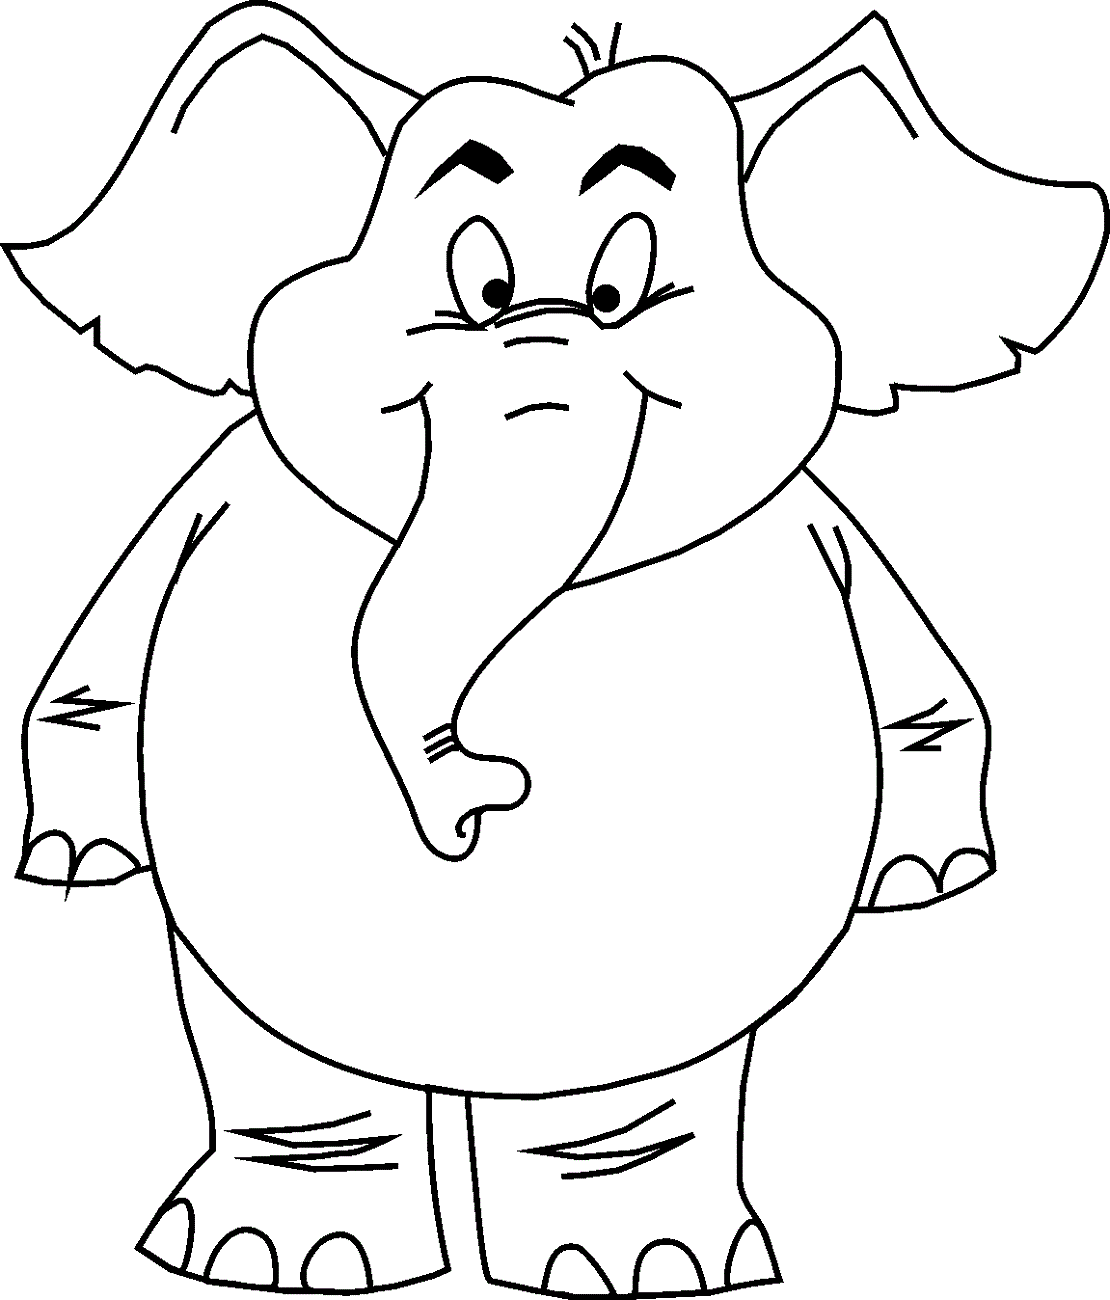 Children Coloring Pages Cartoon